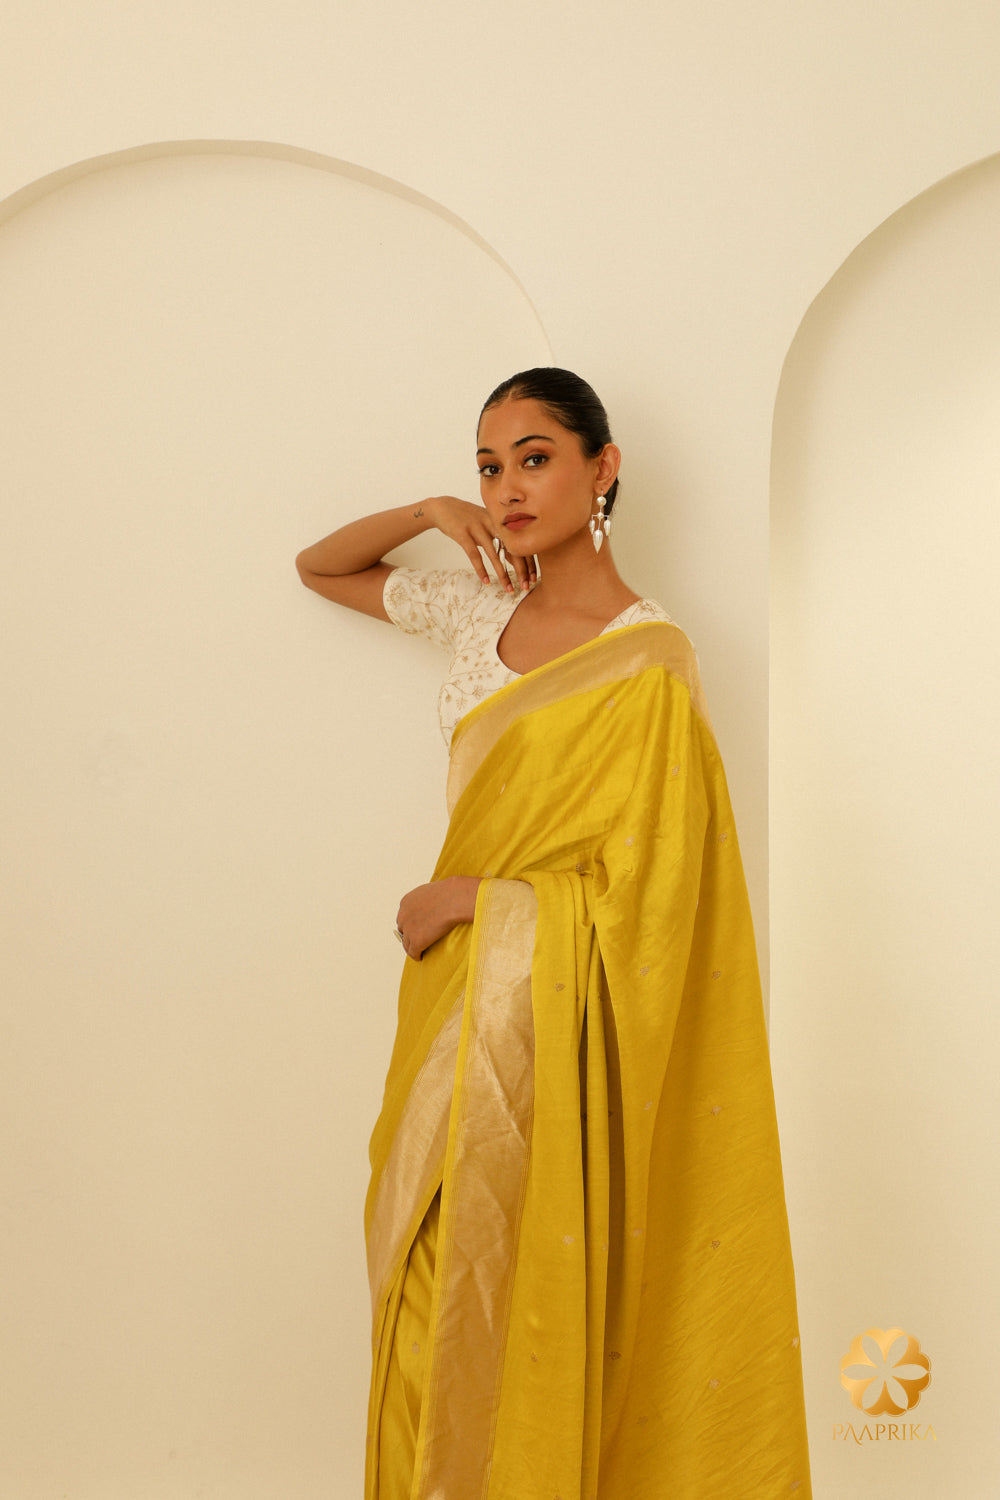 The saree being worn at a special occasion, highlighting its uniqueness and the lasting impression it creates.